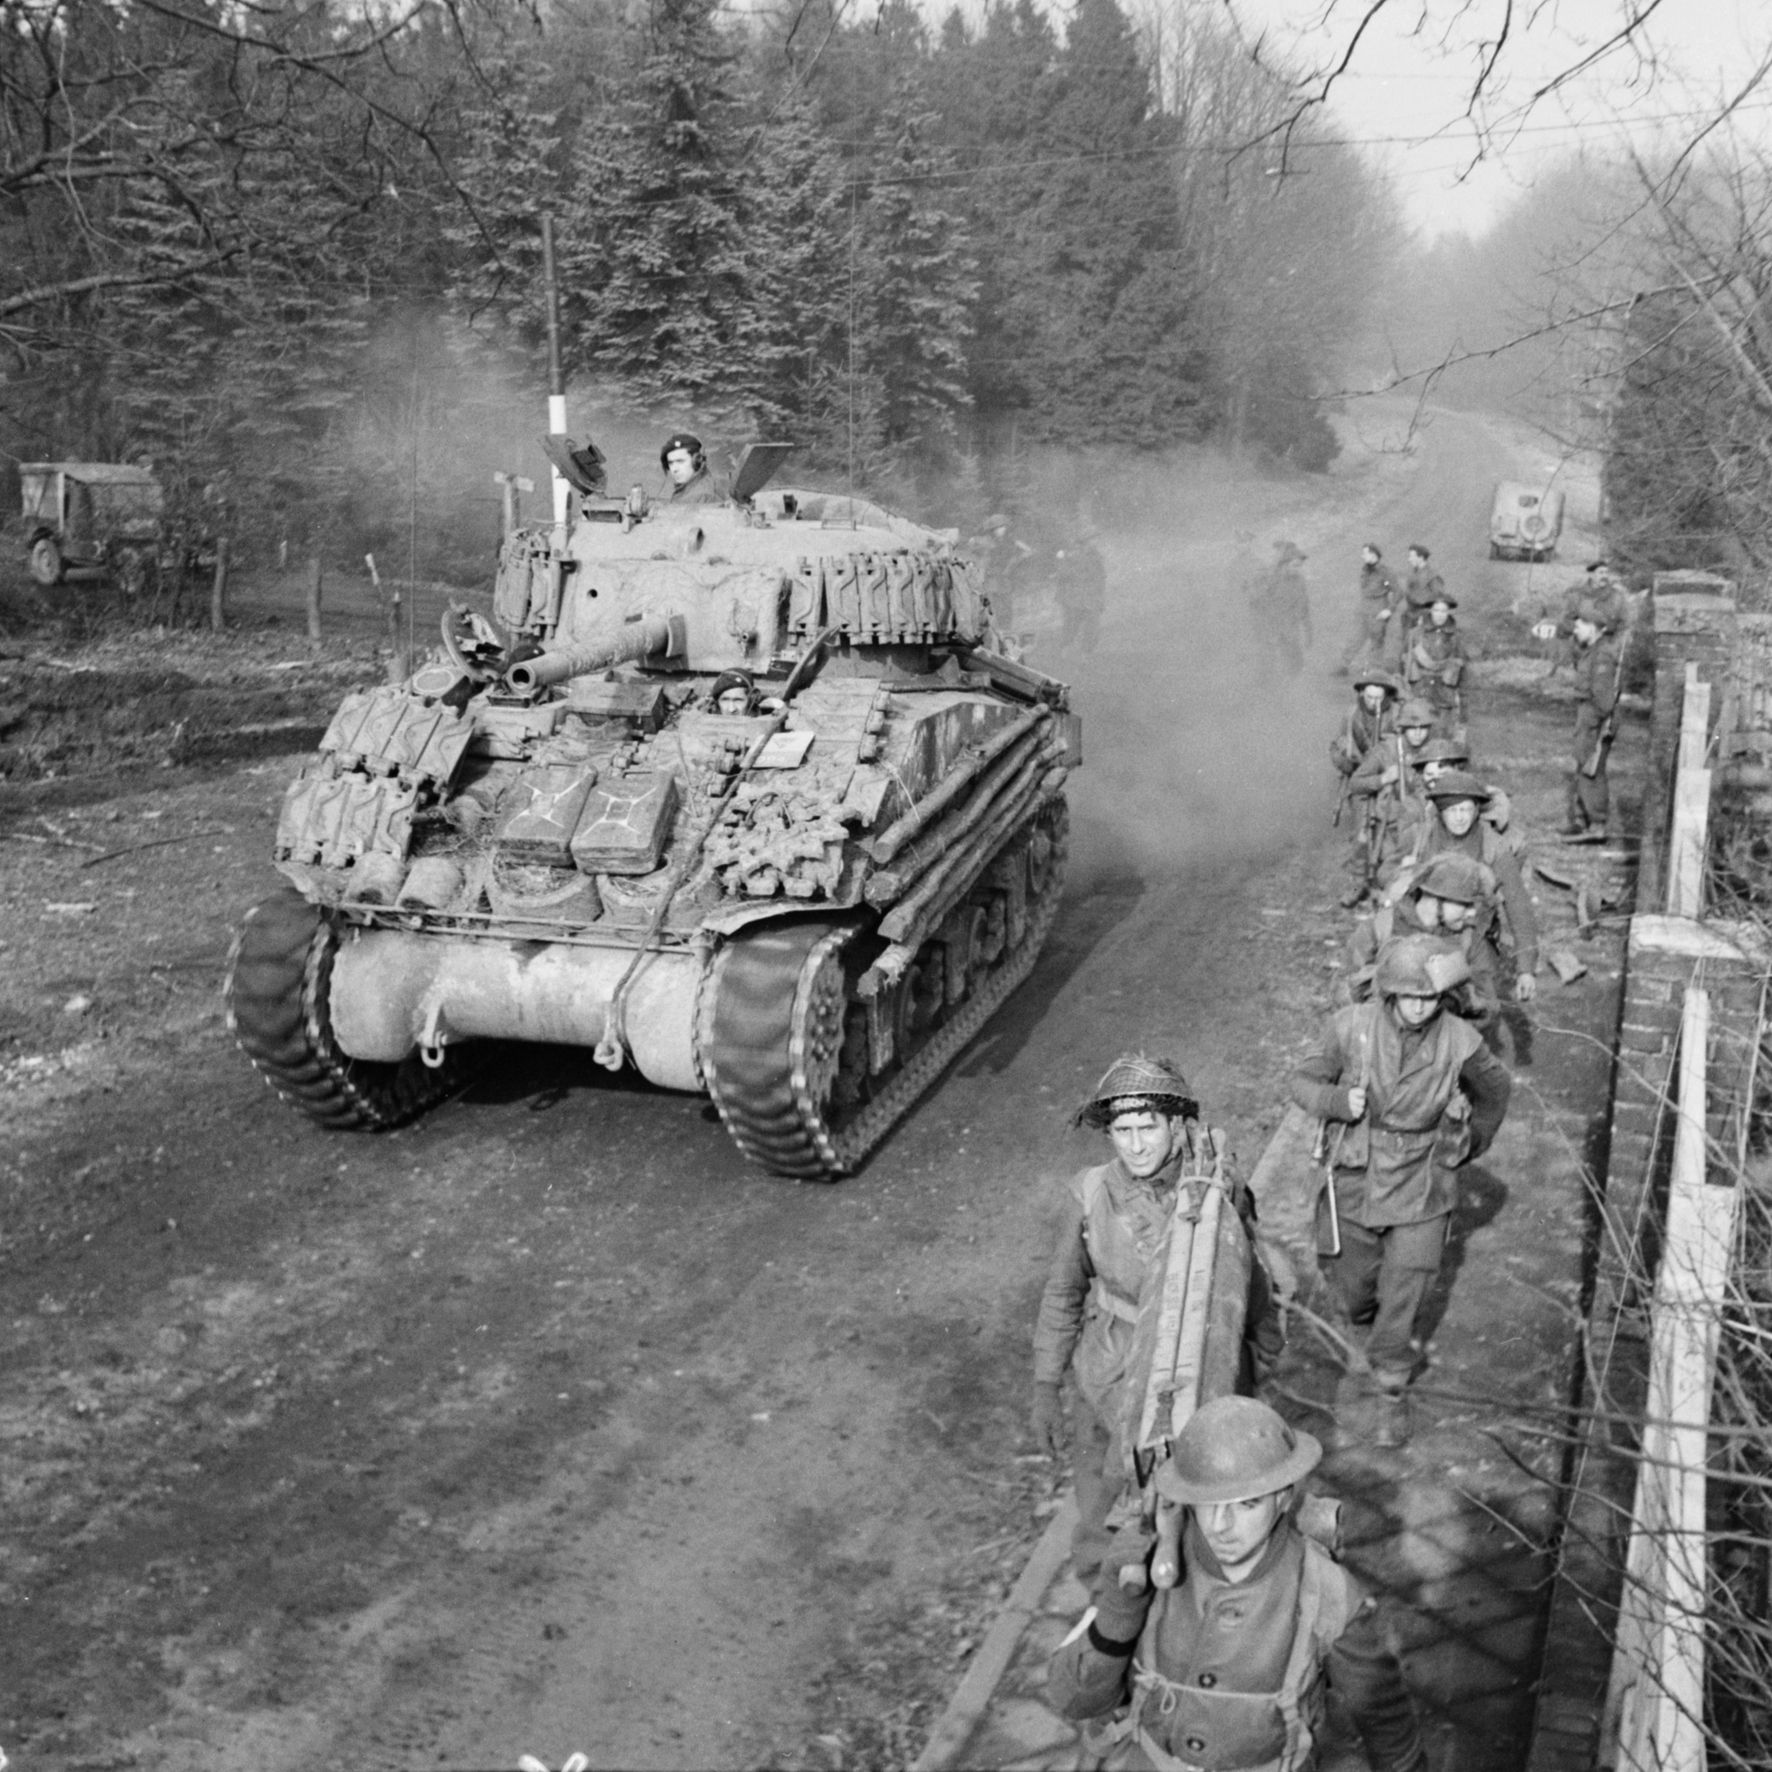 A Sherman tank rolls past soldiers of the British 43rd Wessex Division on February 17, 1945. This photograph was taken during the Allied advance on the German town of Goch as fighting raged in the Reichswald. 